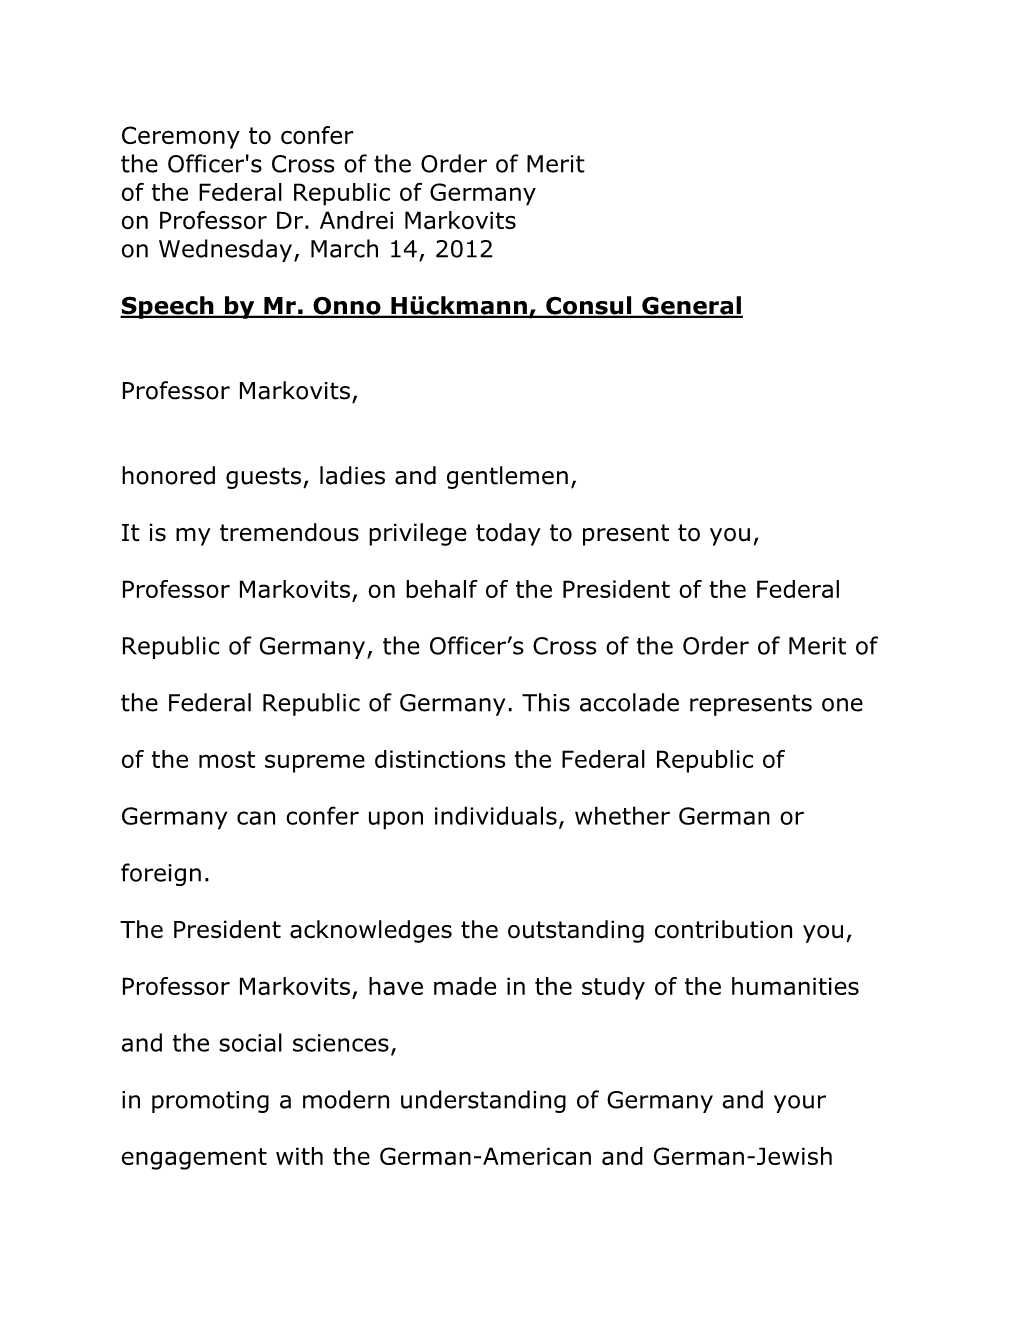 Ceremony to Confer the Officer's Cross of the Order of Merit of the Federal Republic of Germany on Professor Dr